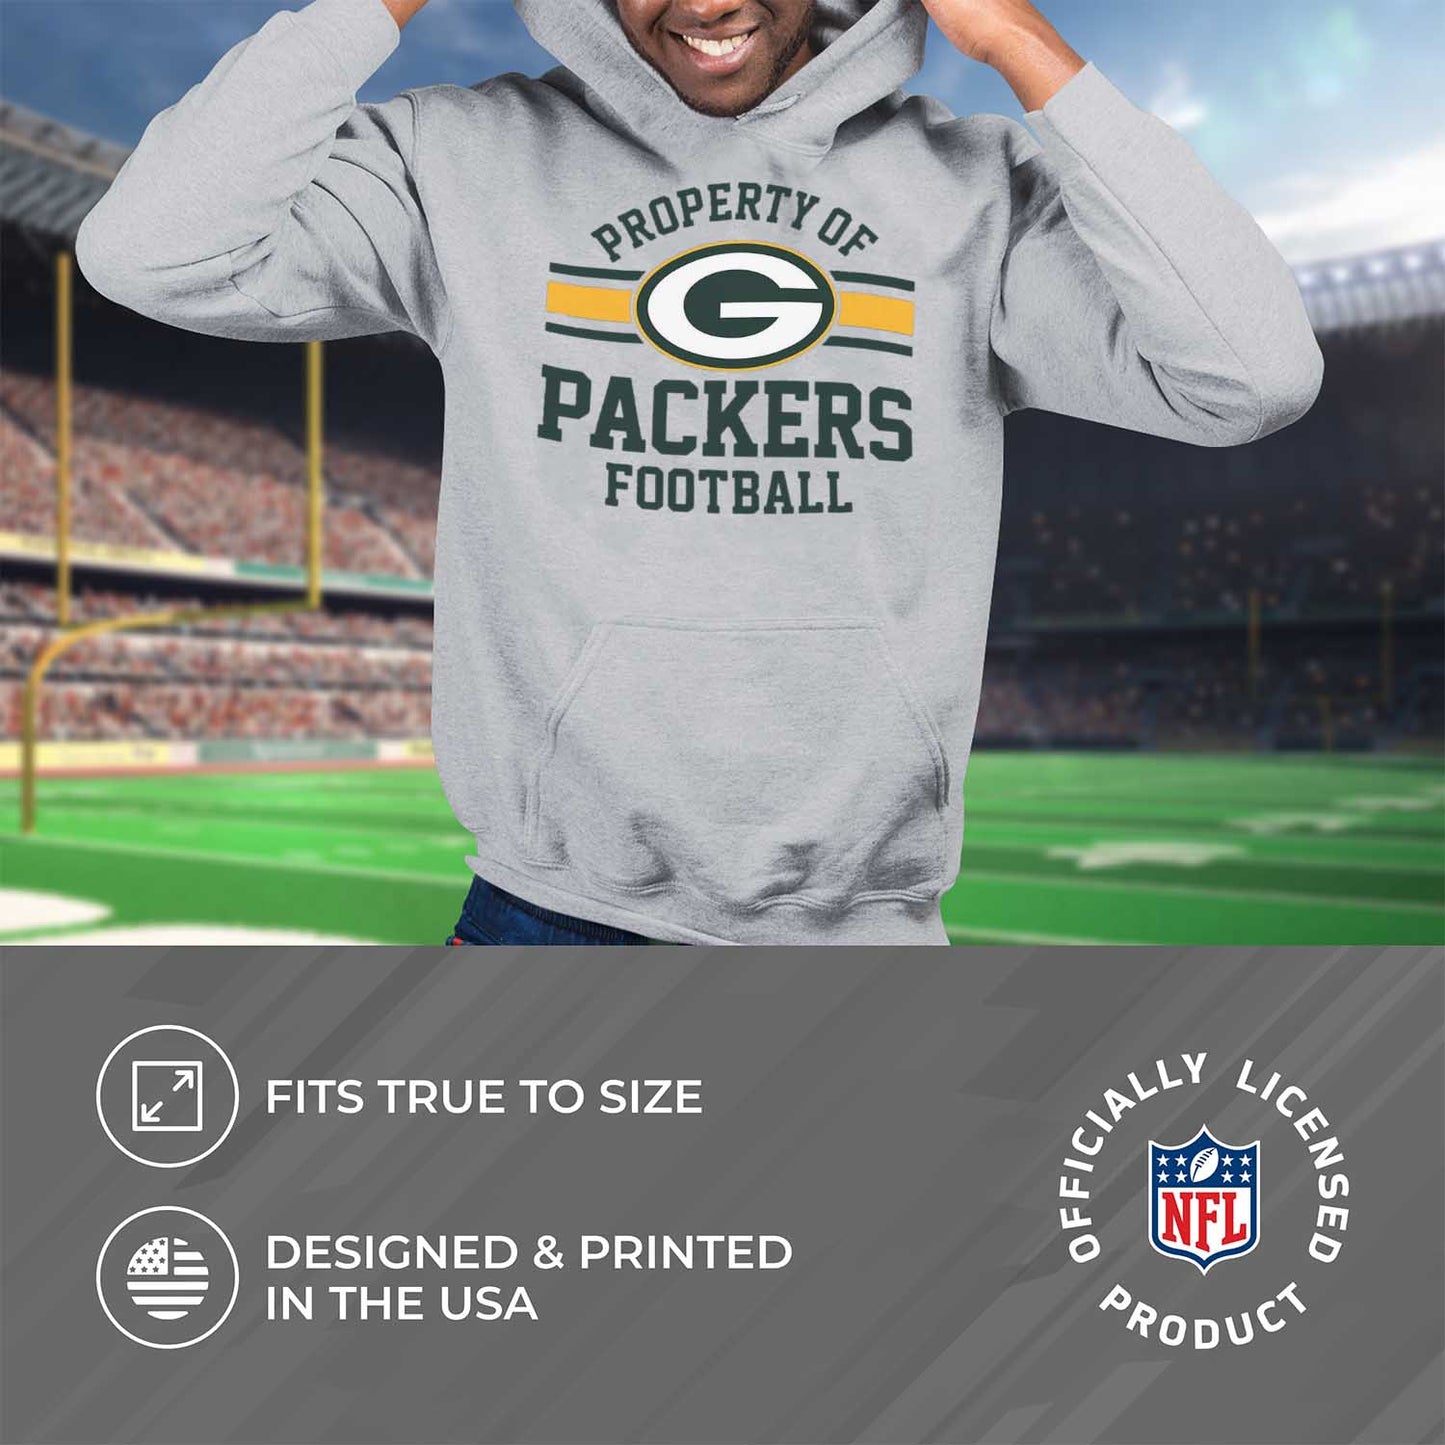 Green Bay Packers NFL Adult Property Of Hooded Sweatshirt - Sport Gray